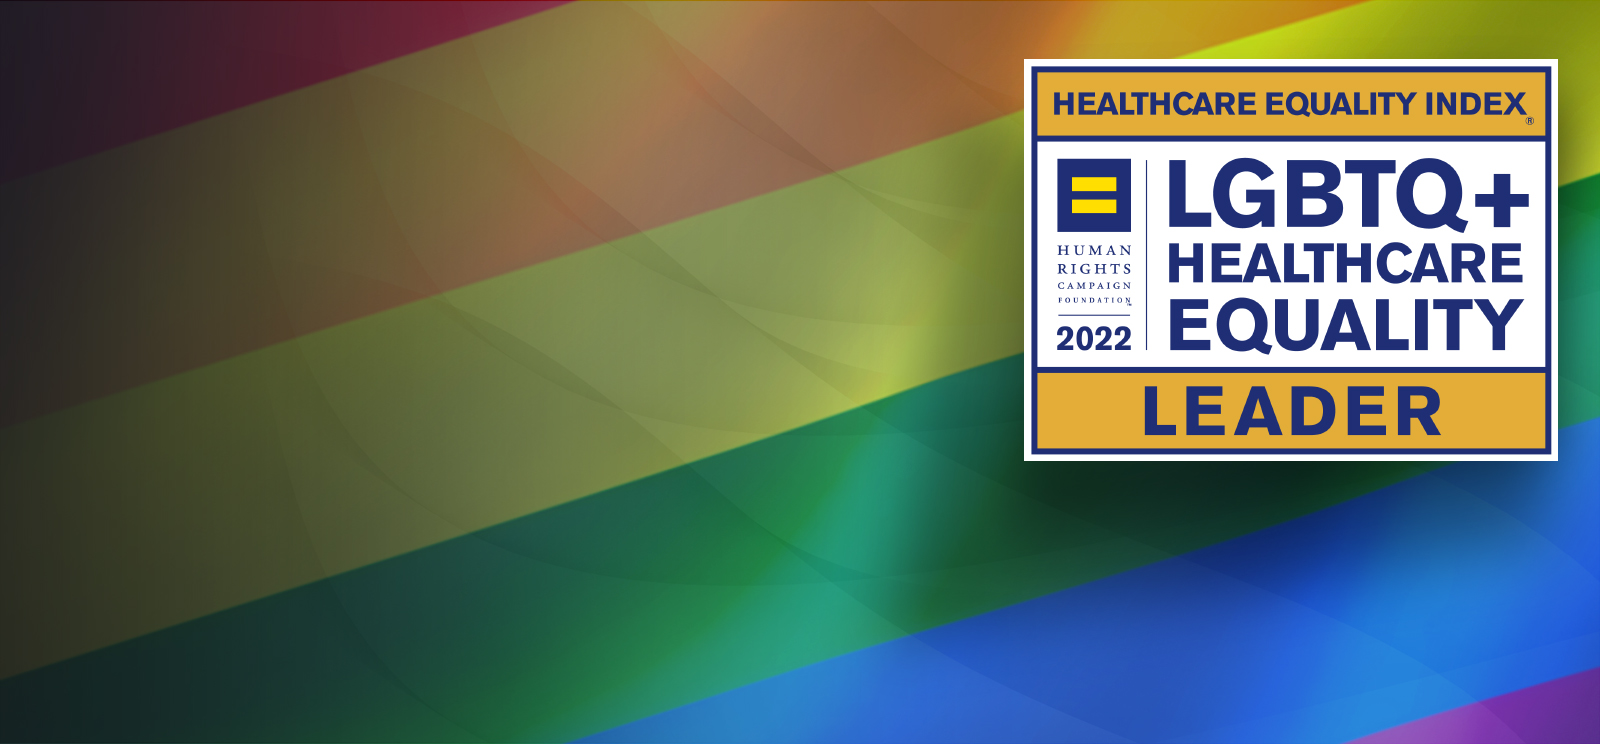 NATIONAL LEADERS IN LGBTQ+ HEALTHCARE EQUALITY